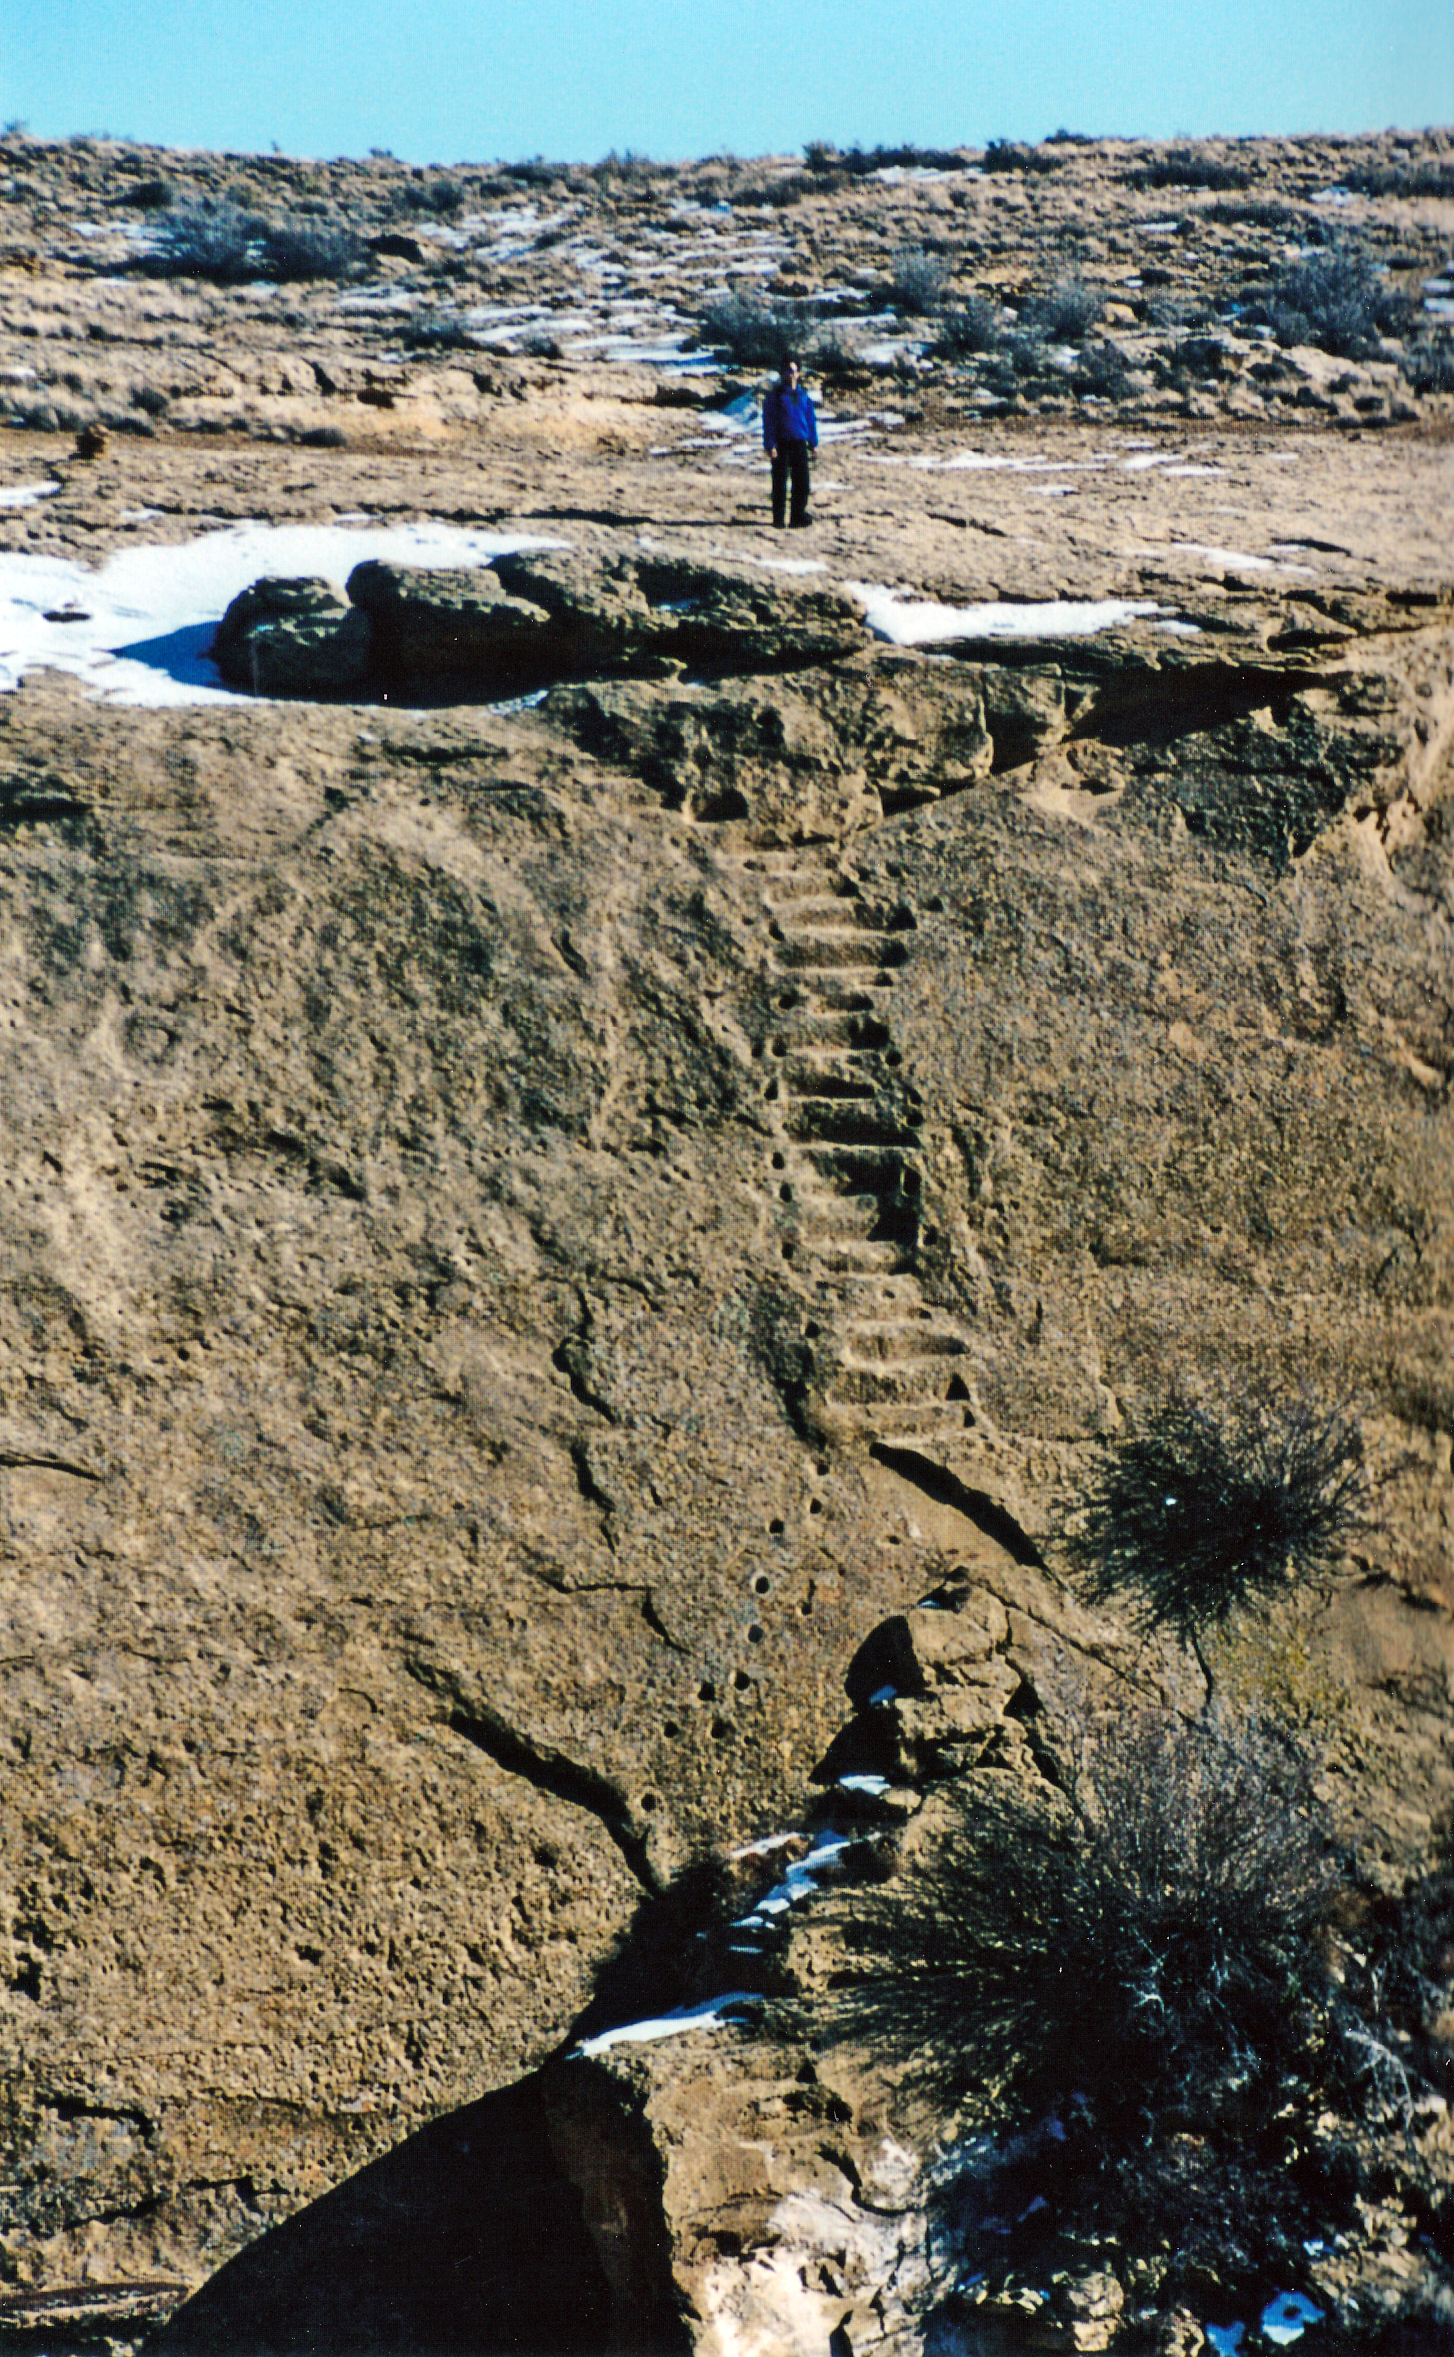 The prehistoric stairway and handholds were carved into this cliff by the Chacoan people who made this area the center of a vast trading zone radiating hundreds of miles in all directions from what is now Chaco Culture National Historical Park. Photo by Crista Worthy.